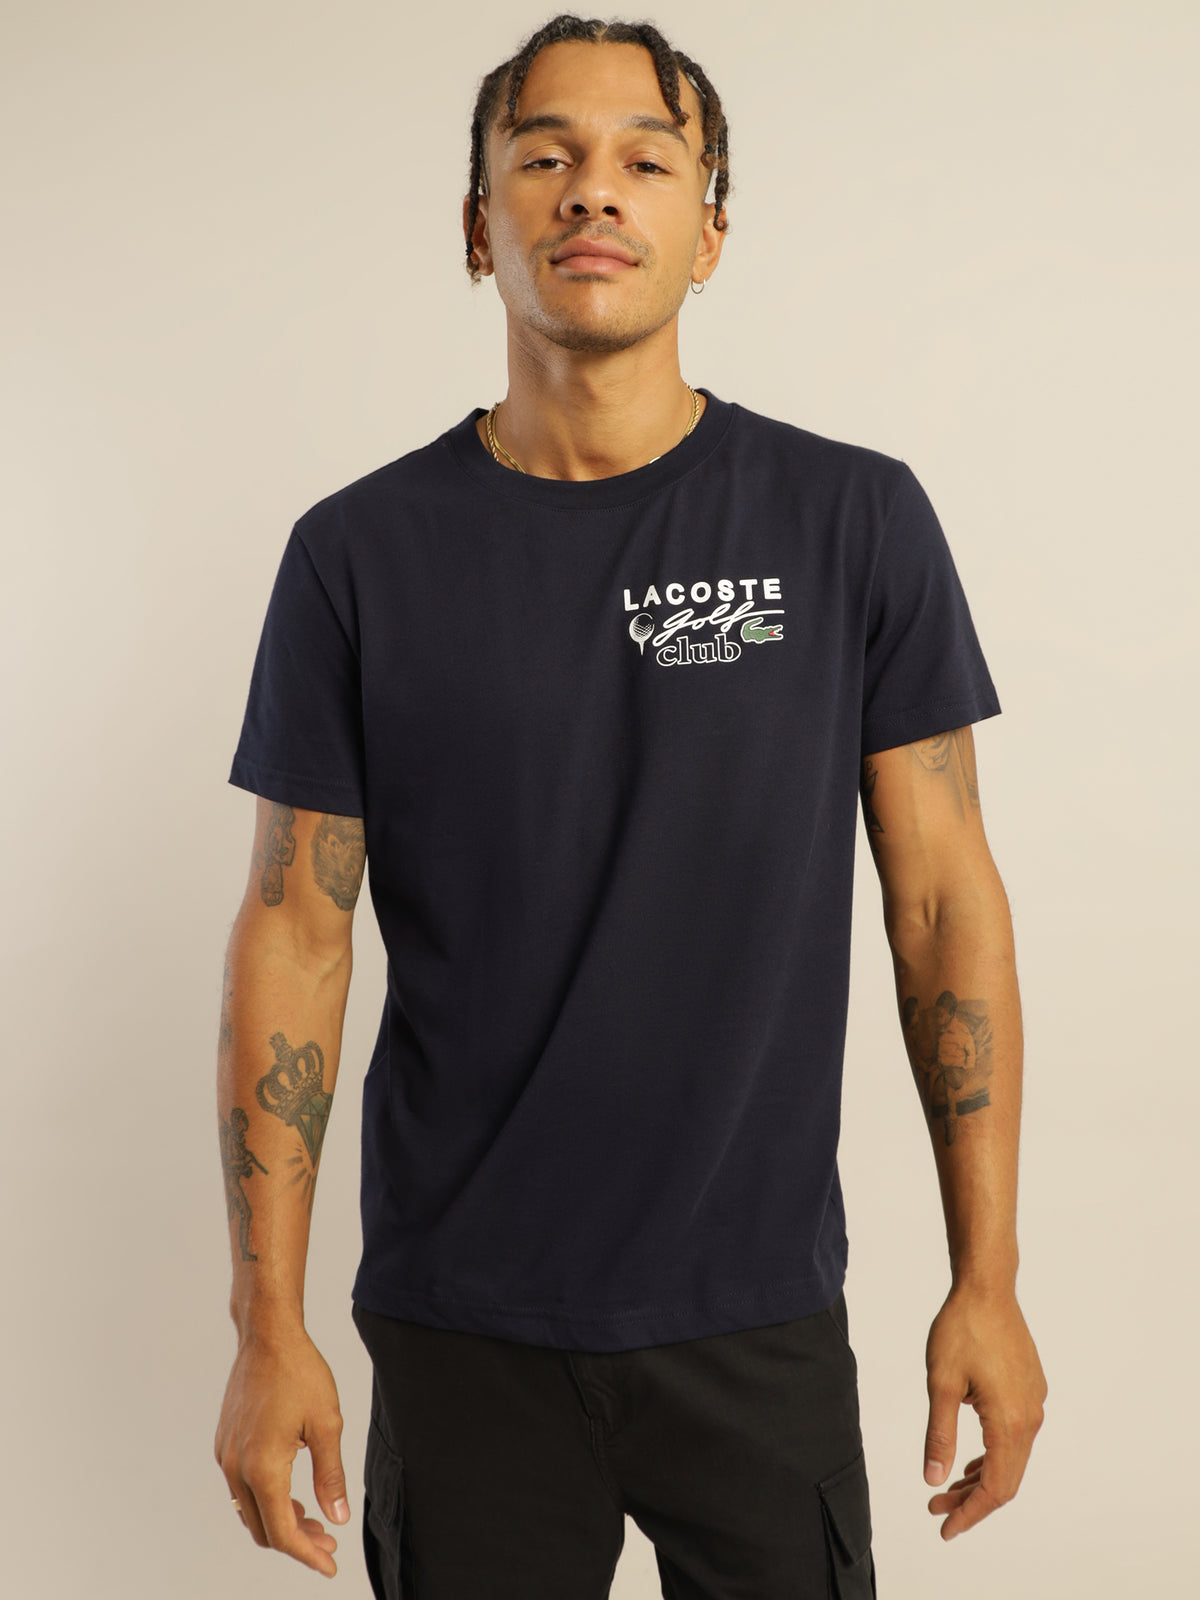 Lacoste Golf Club T-Shirt in Navy